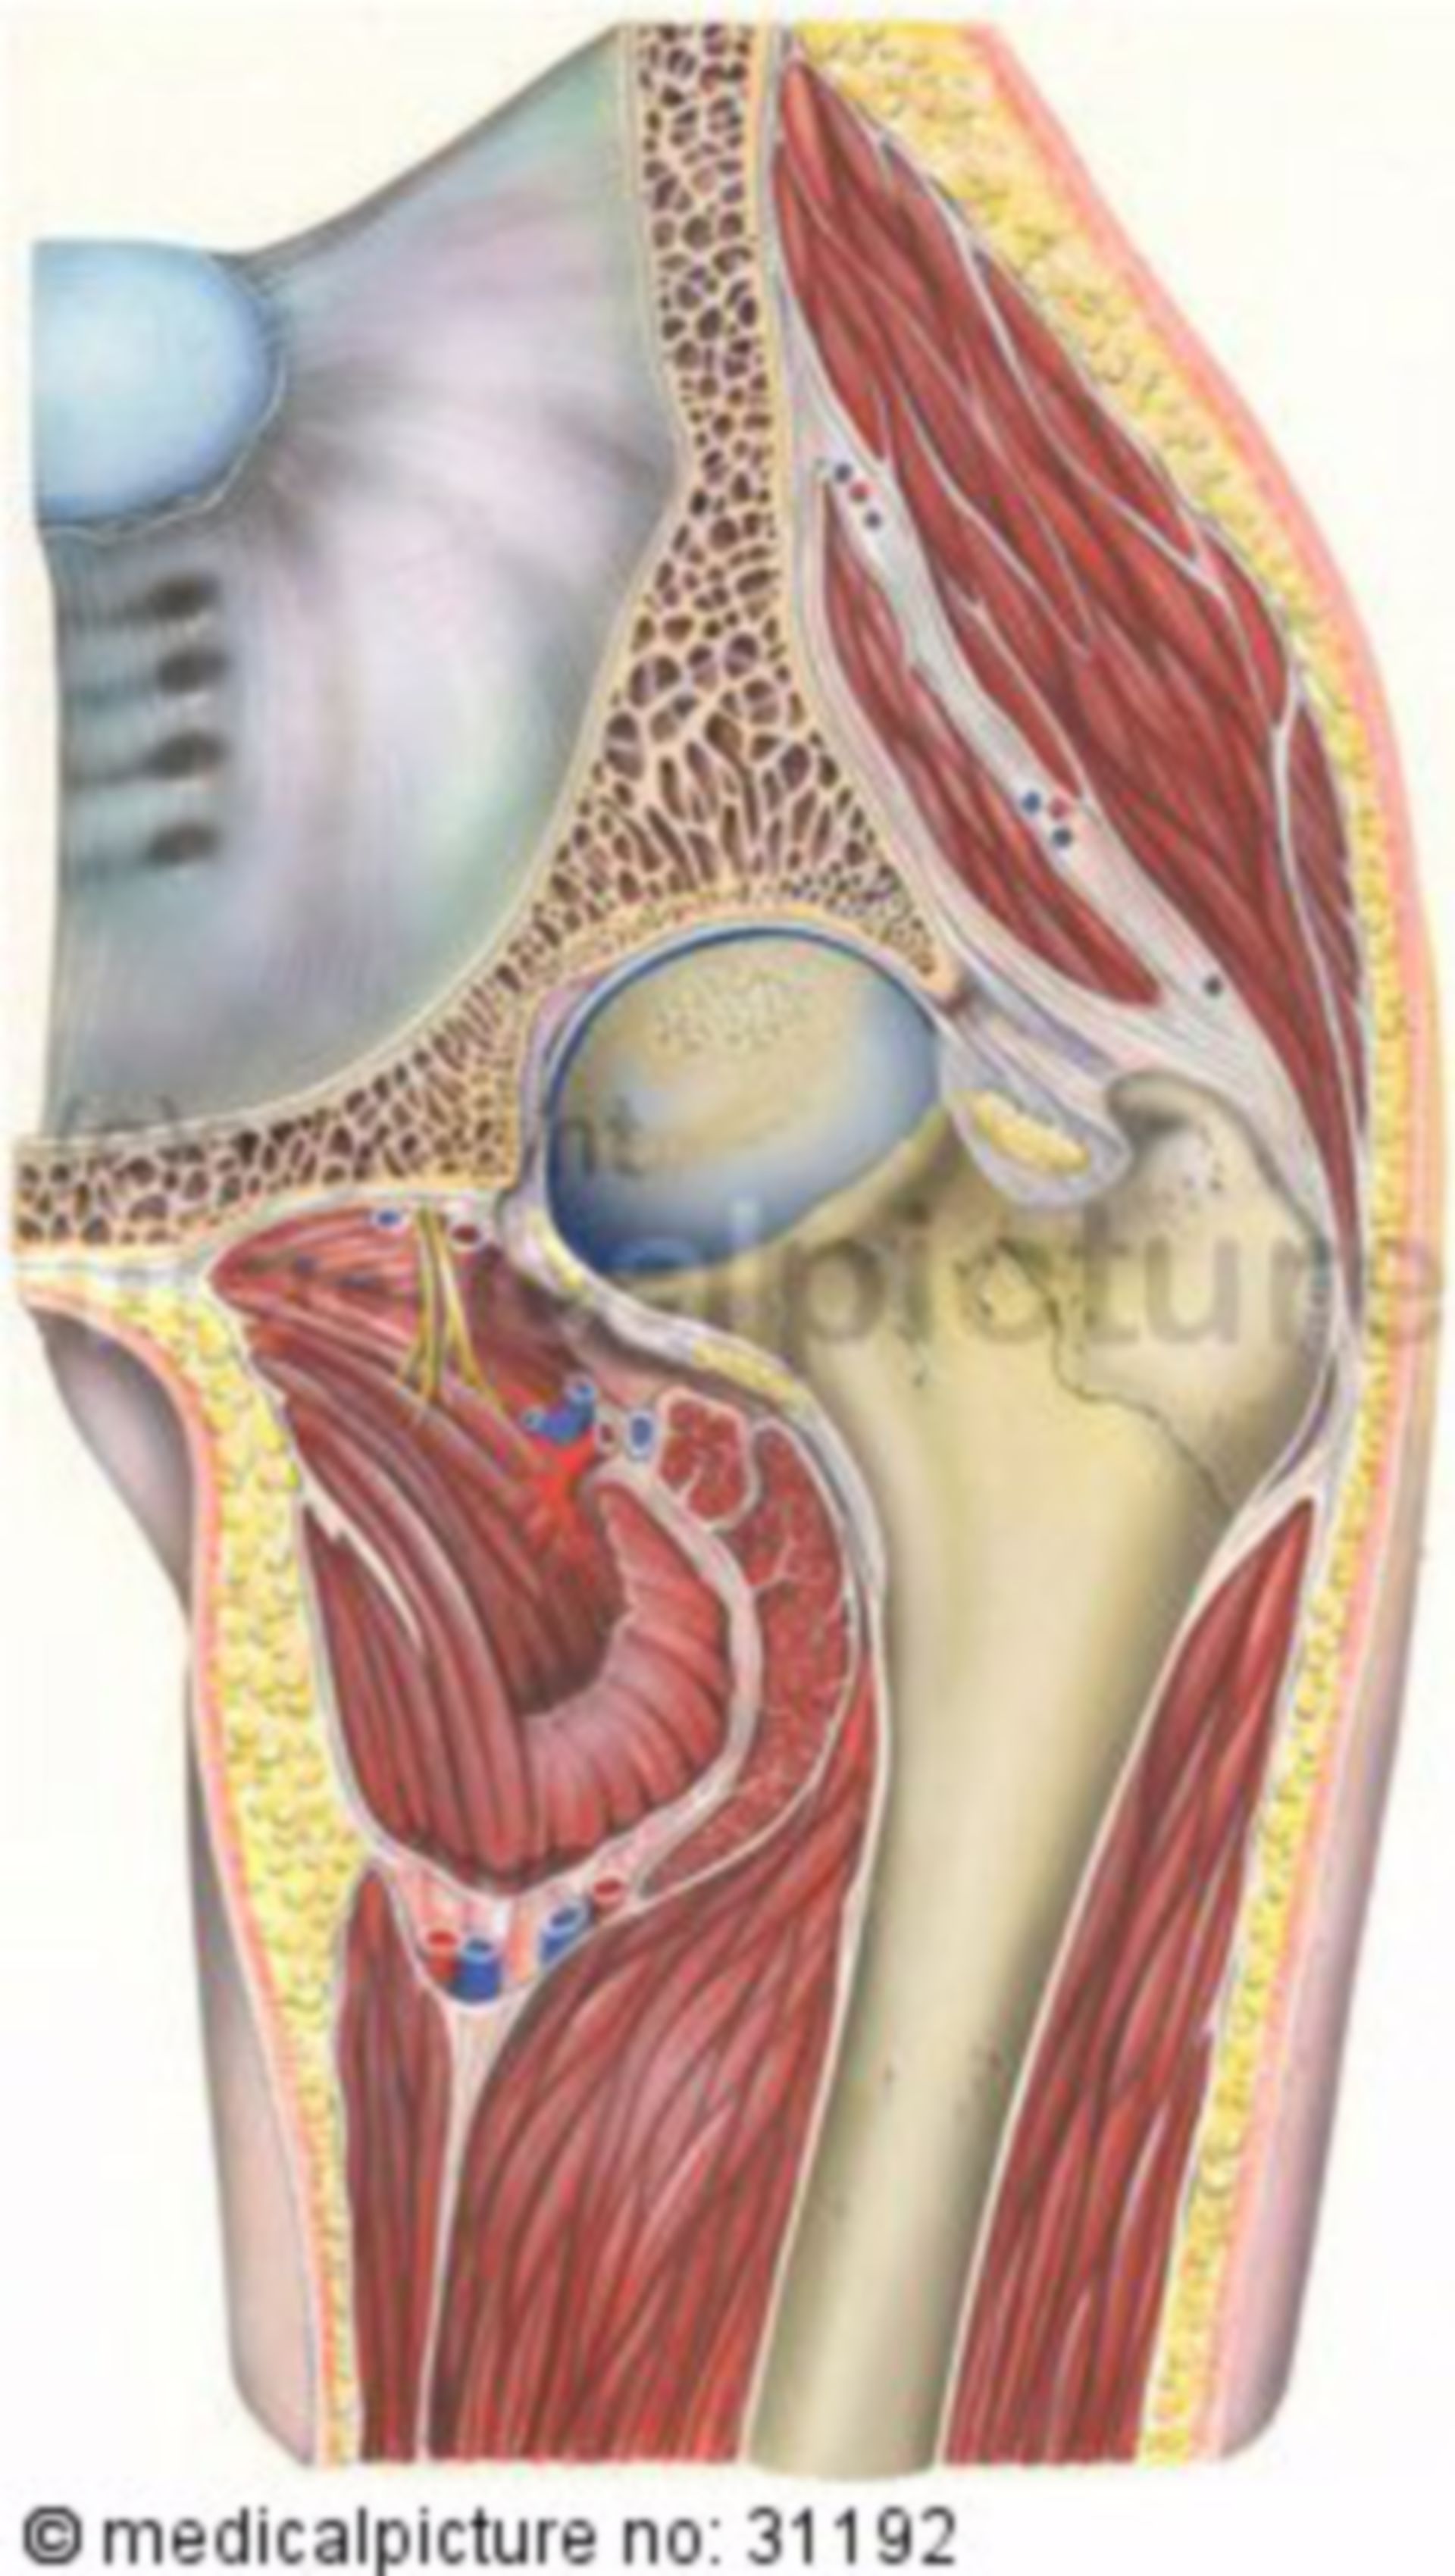 Arthrosis of the hip joint (coxarthrosis)